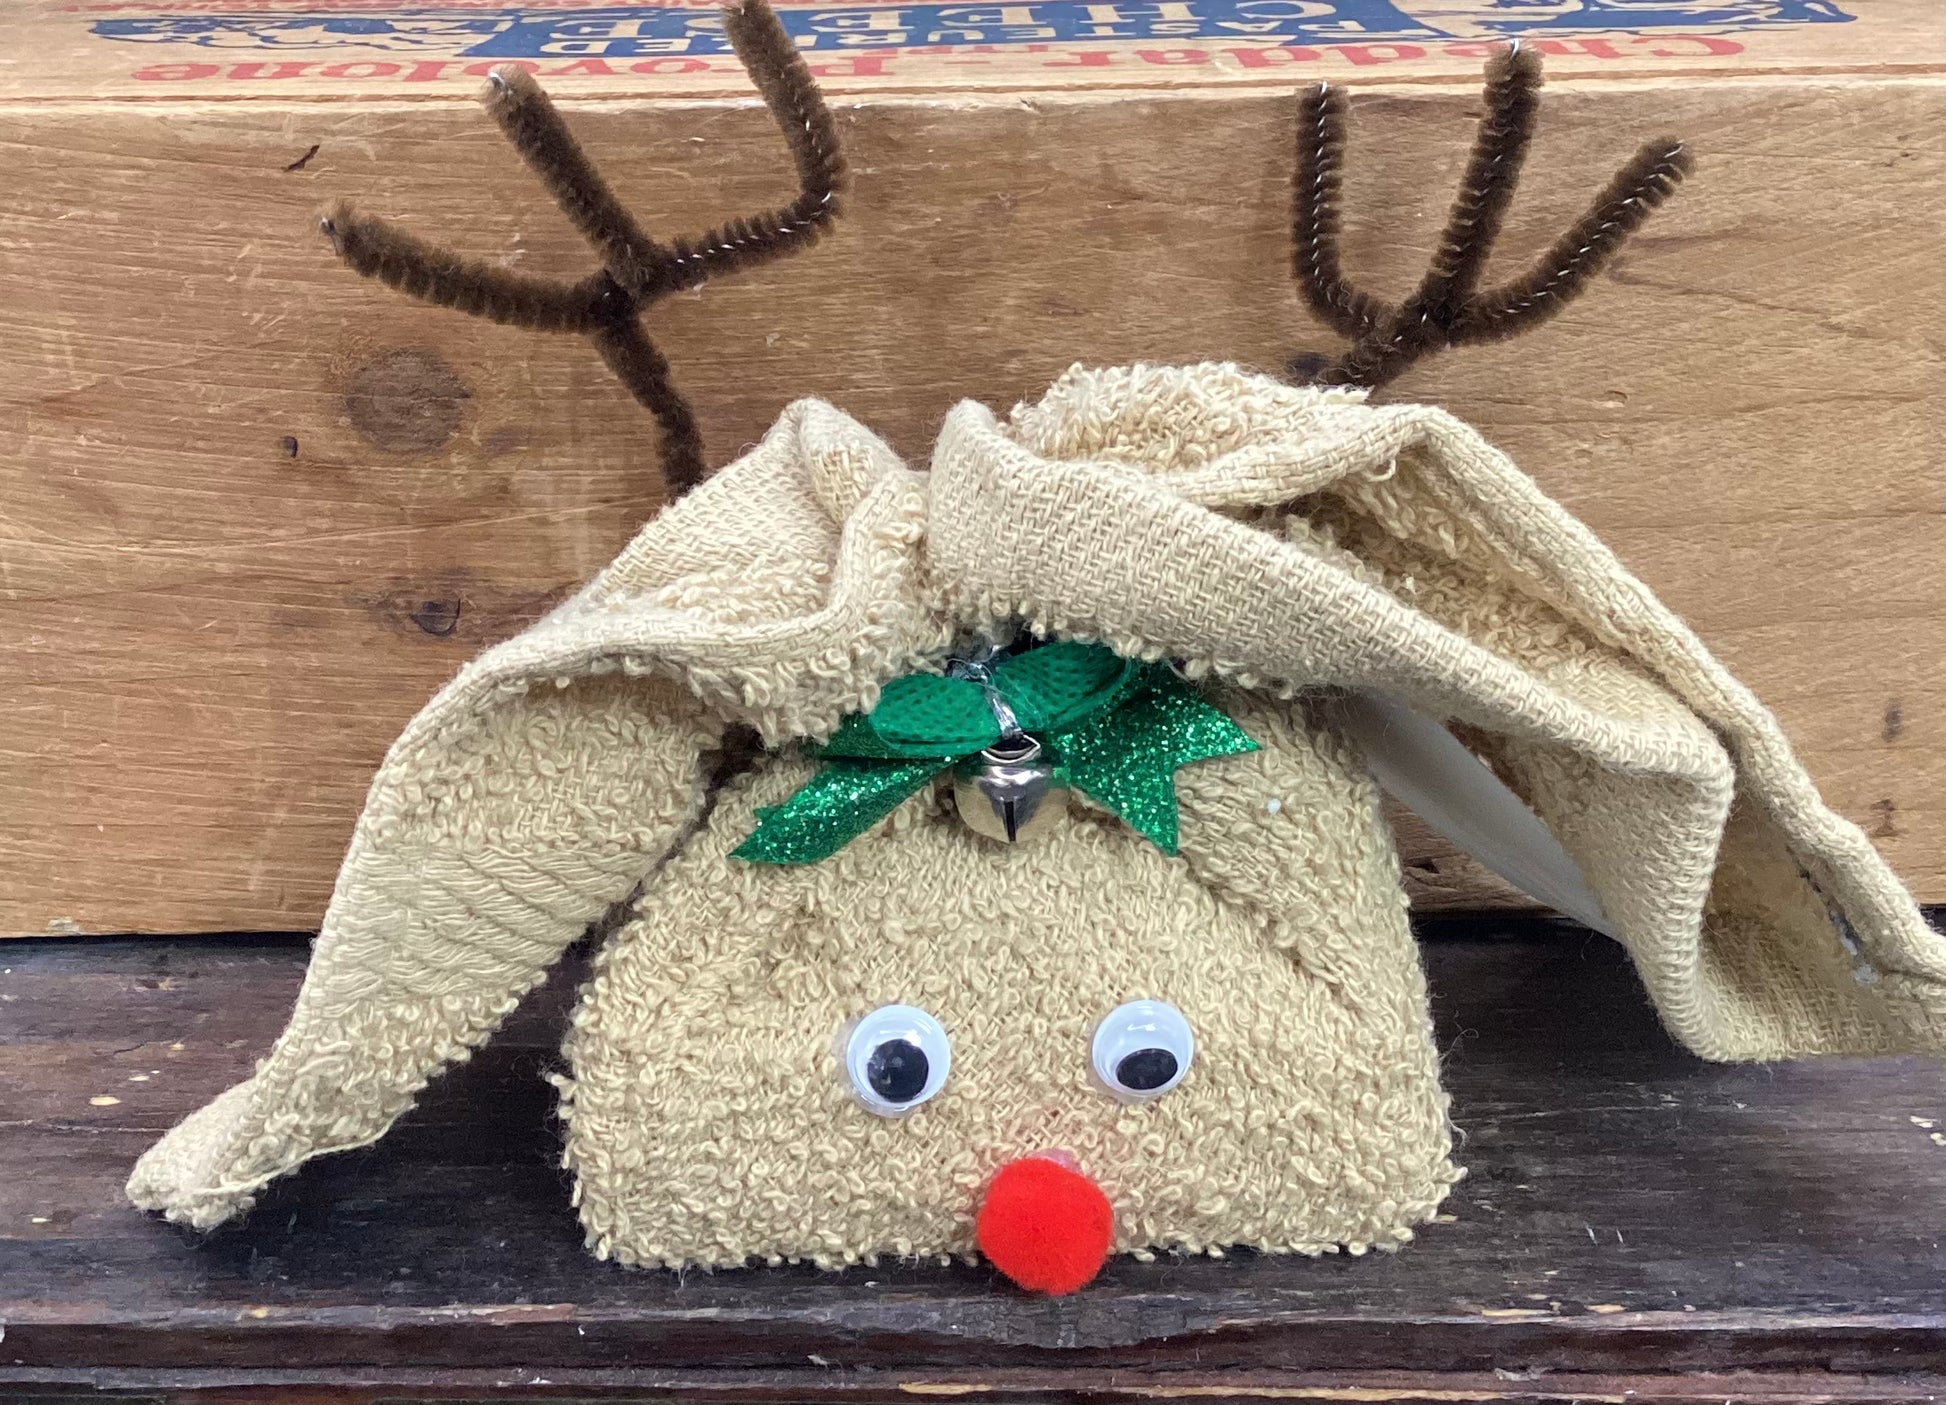 Peppermint Soap in a reindeer shaped washcloth